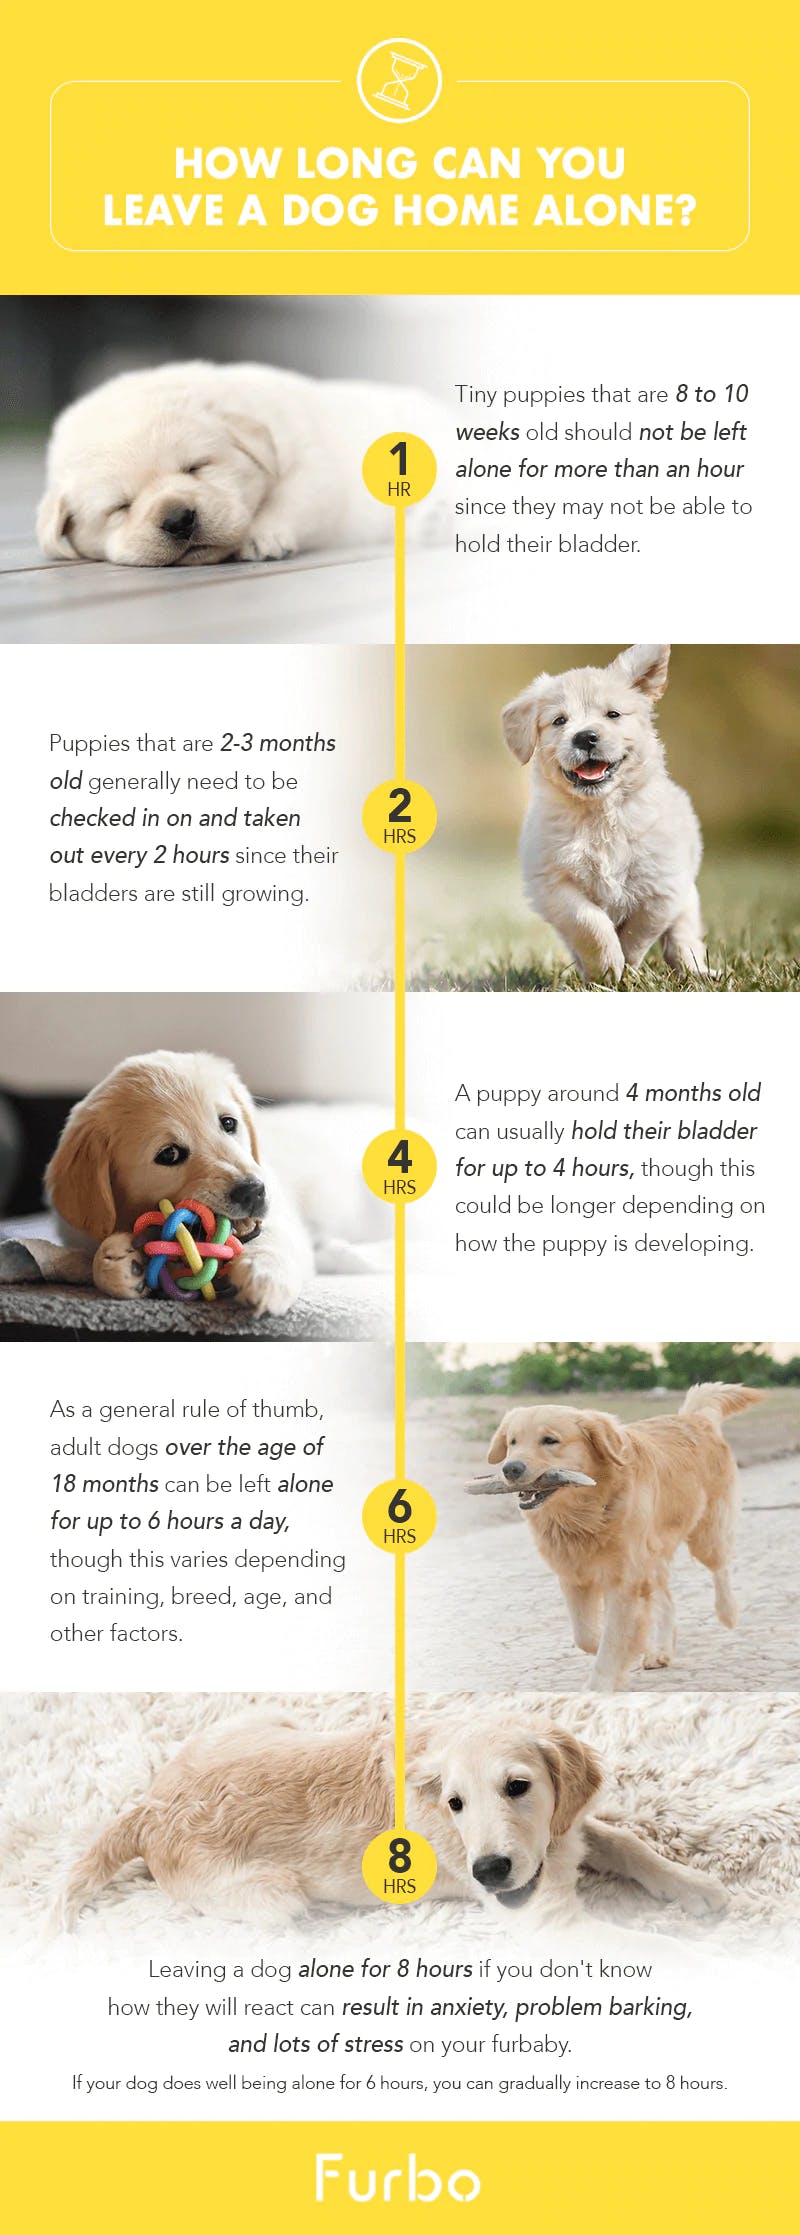 How Long Can You Leave a Dog Alone at Home: Essential Guidelines